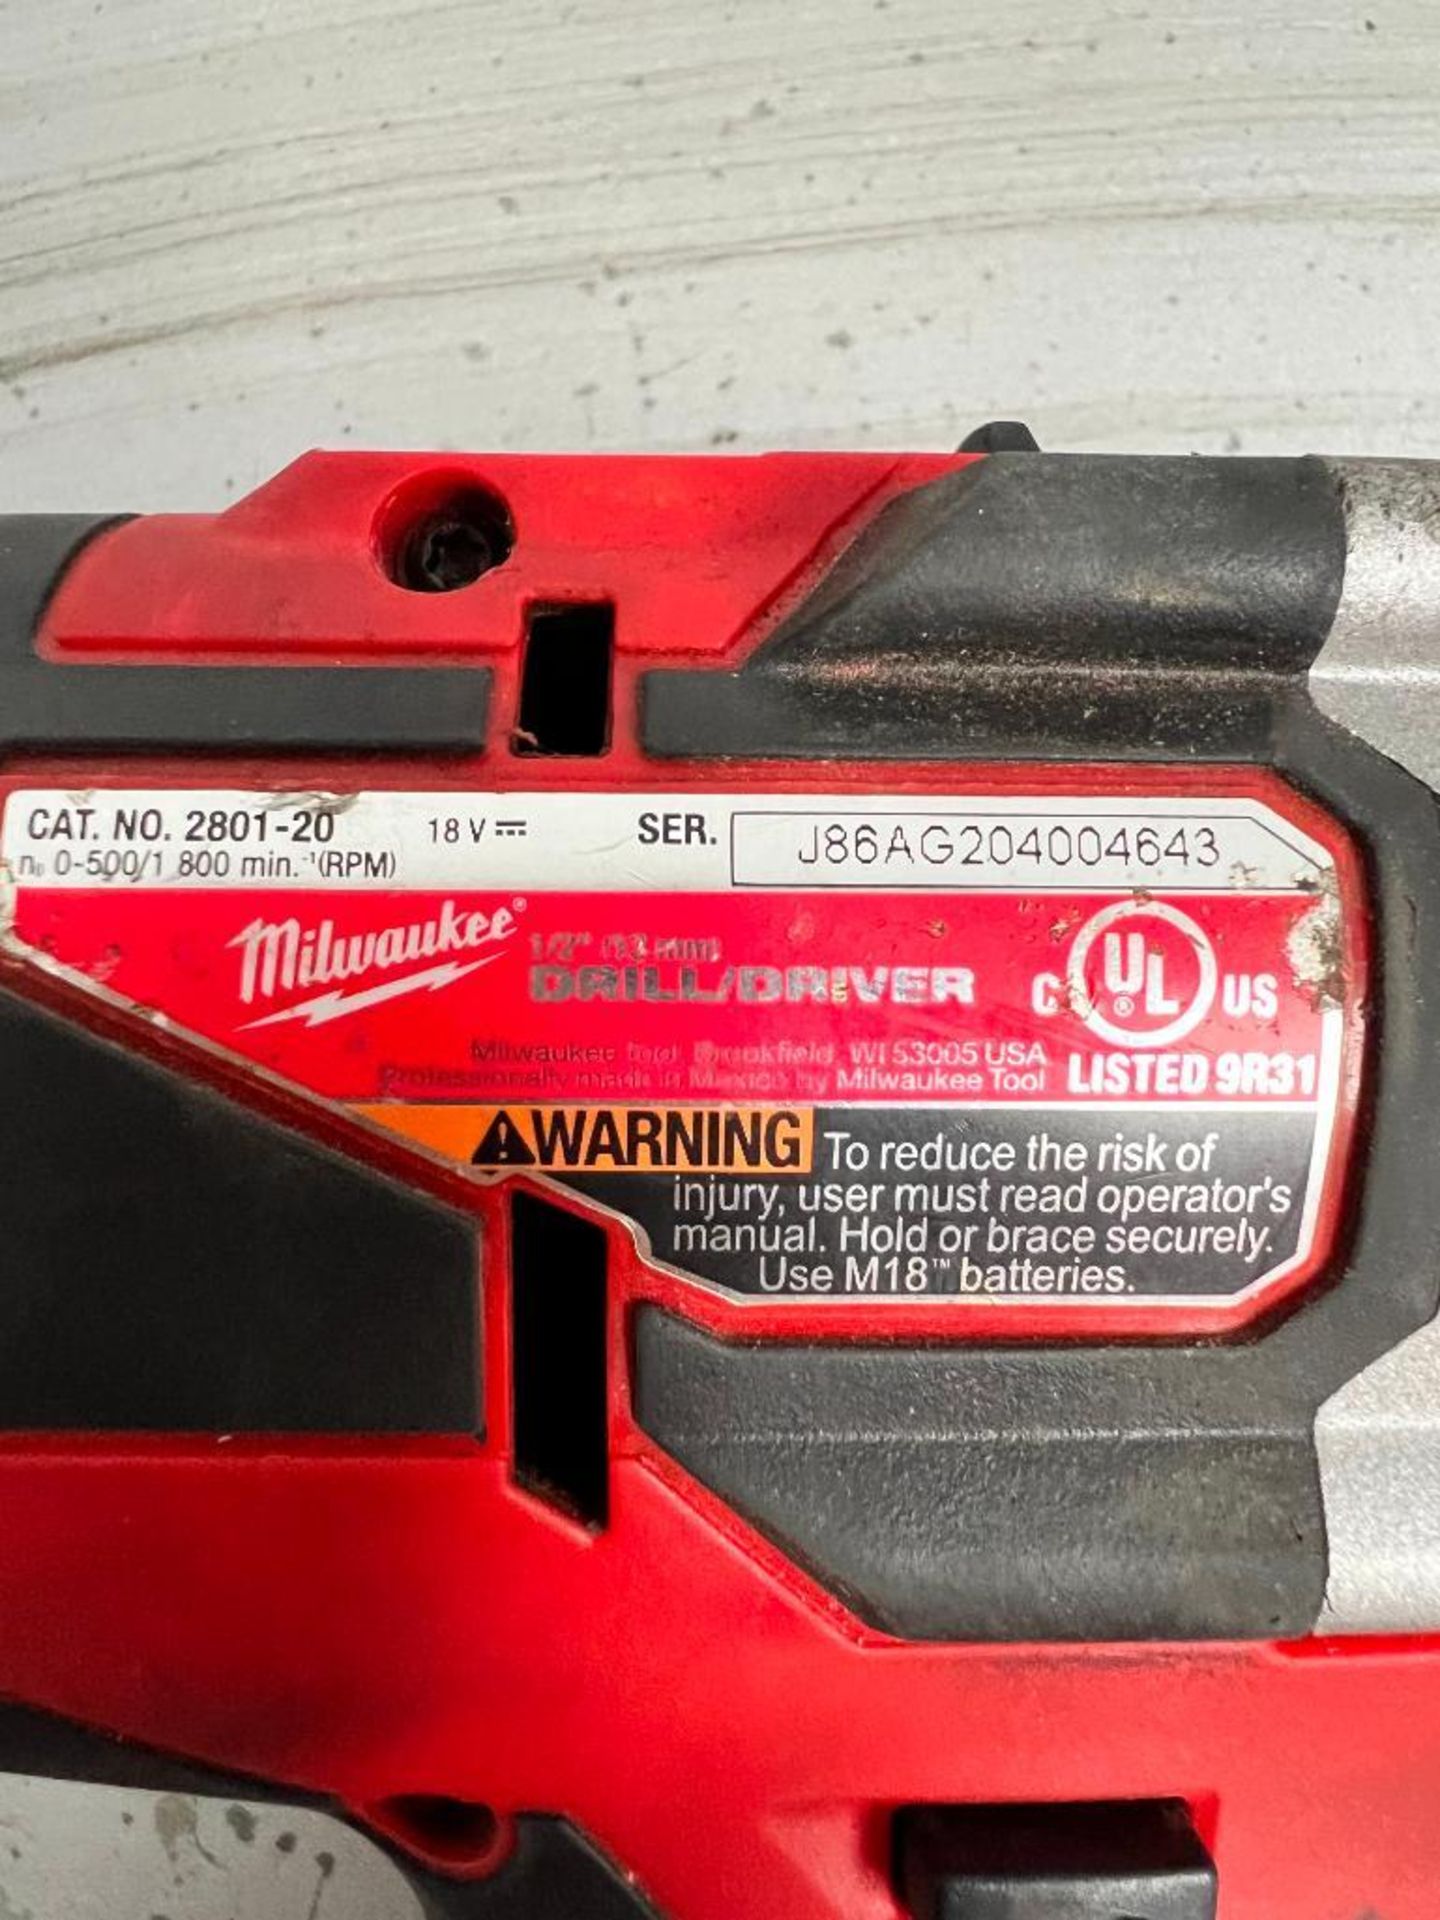 Milwaukee 18 Volt Cordless 1/2" Drill/Driver, S/N J86AG204004643, w/ Battery - Image 4 of 4